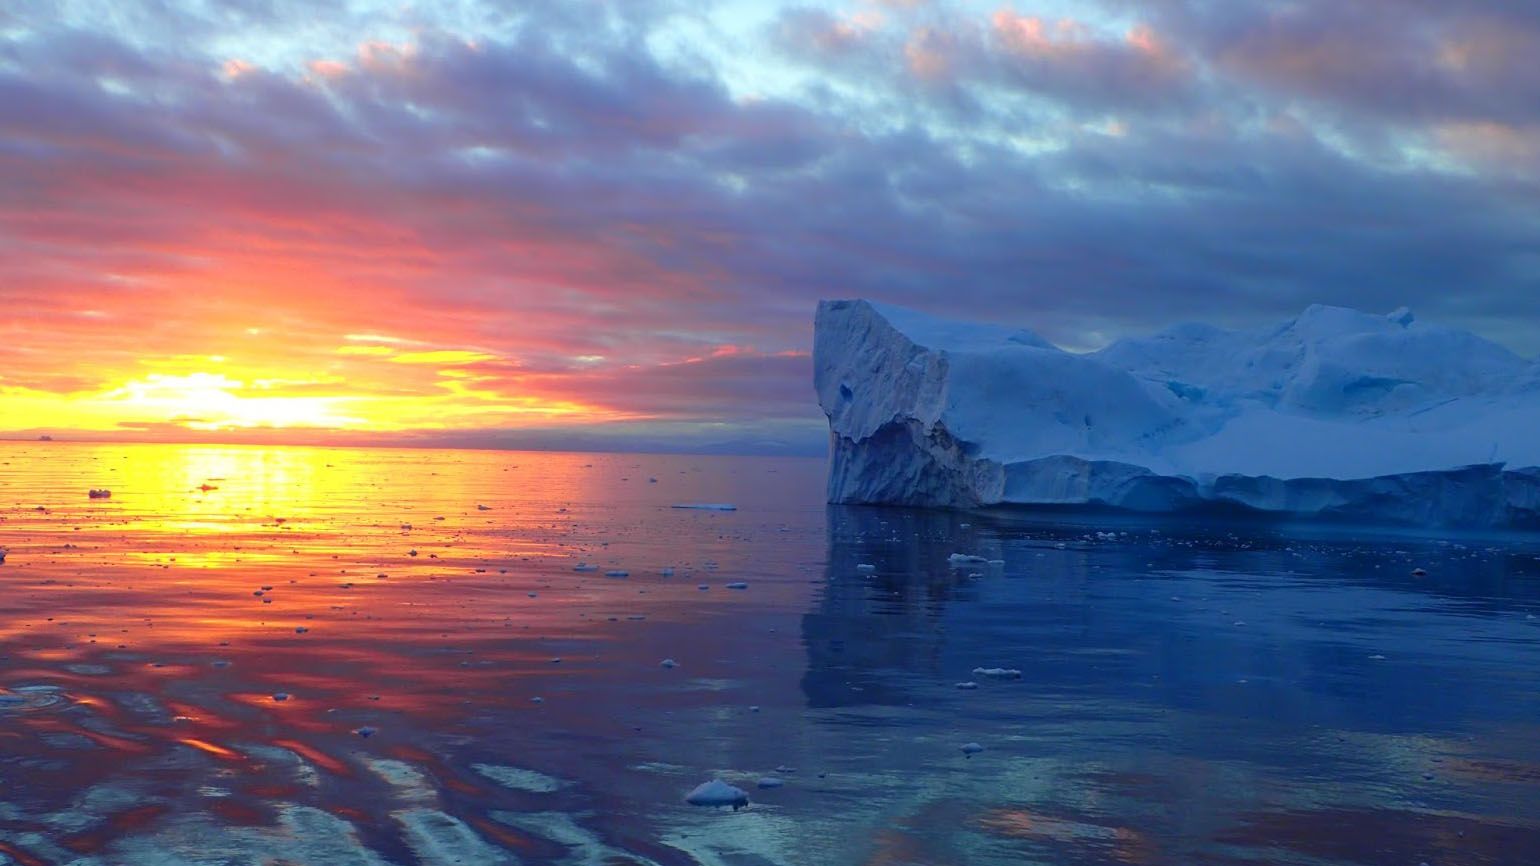 A brilliant sunset in South Pole.